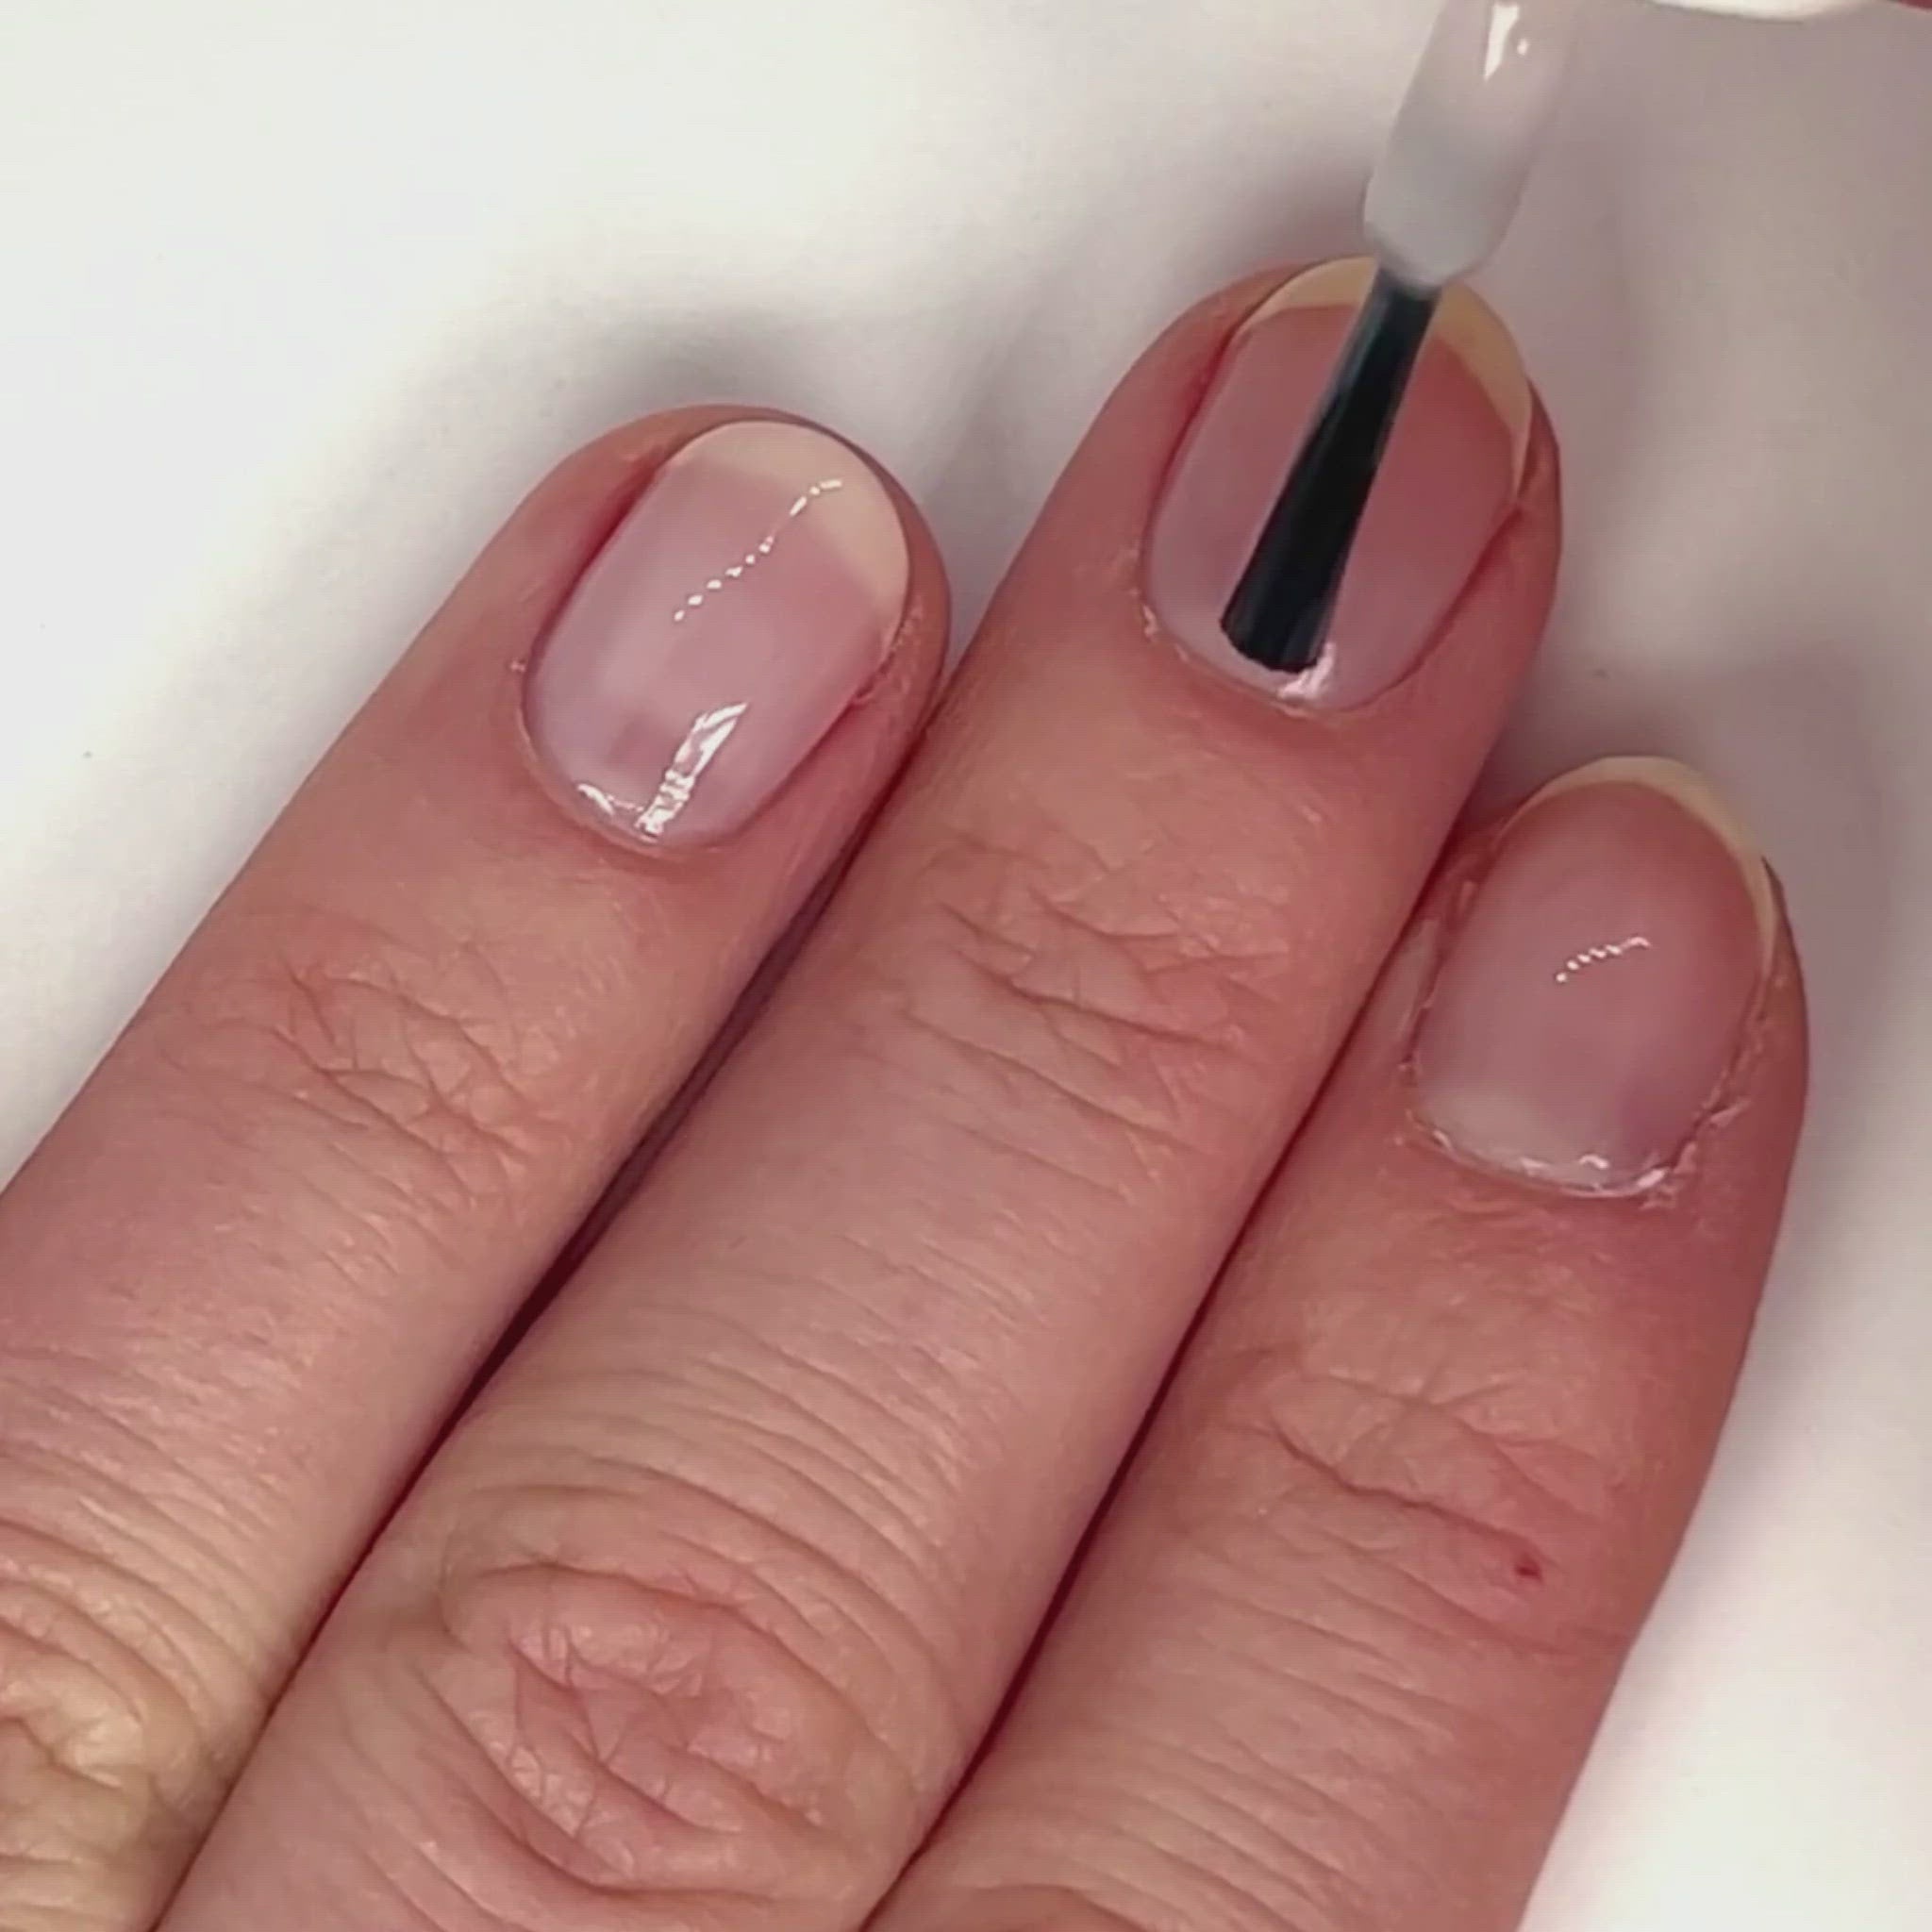 Video of Nails Being Painted with Sheer Pink Polish, Anne